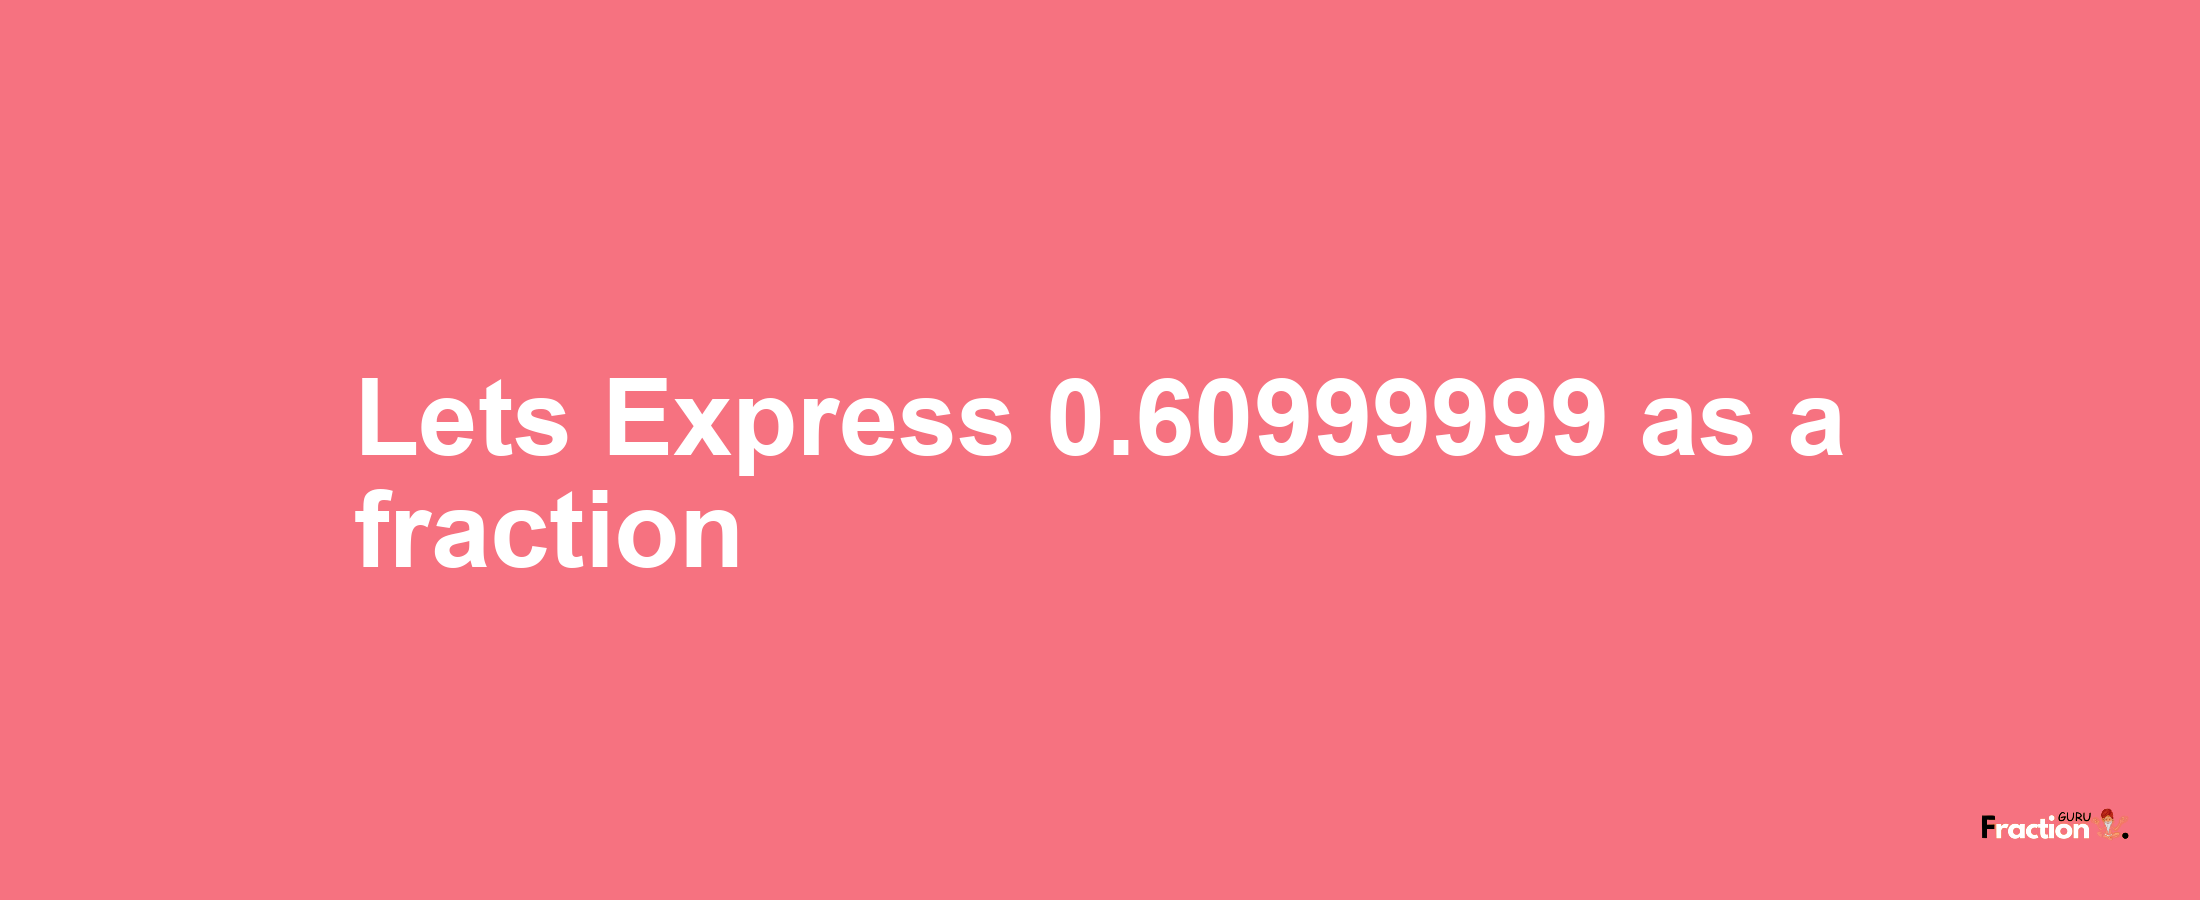 Lets Express 0.60999999 as afraction